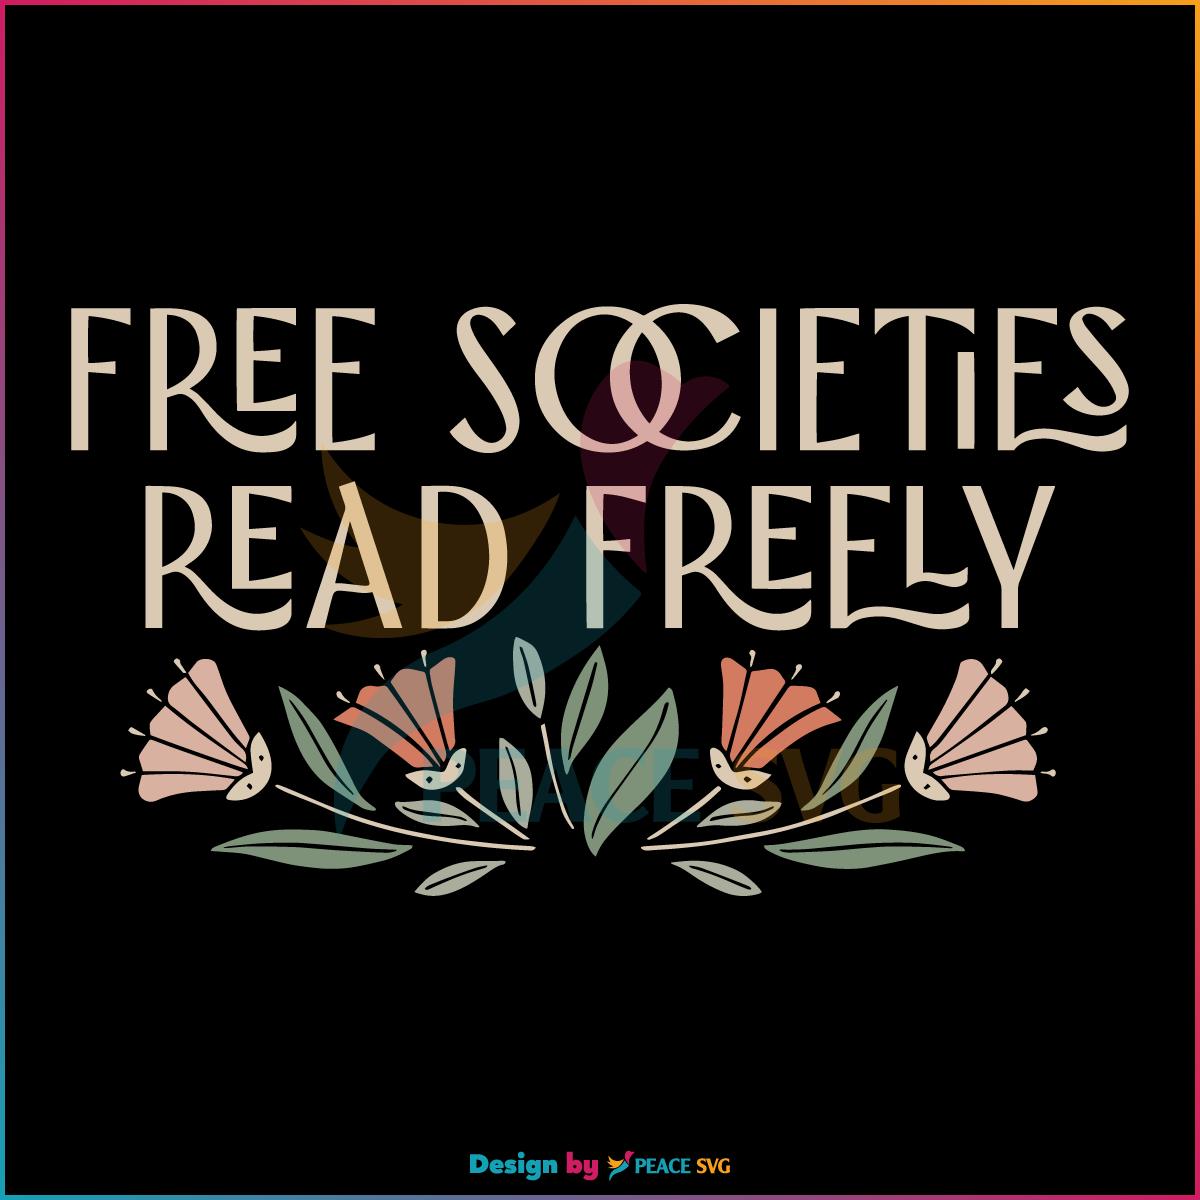 Banned Books Free Societies Read Freely SVG